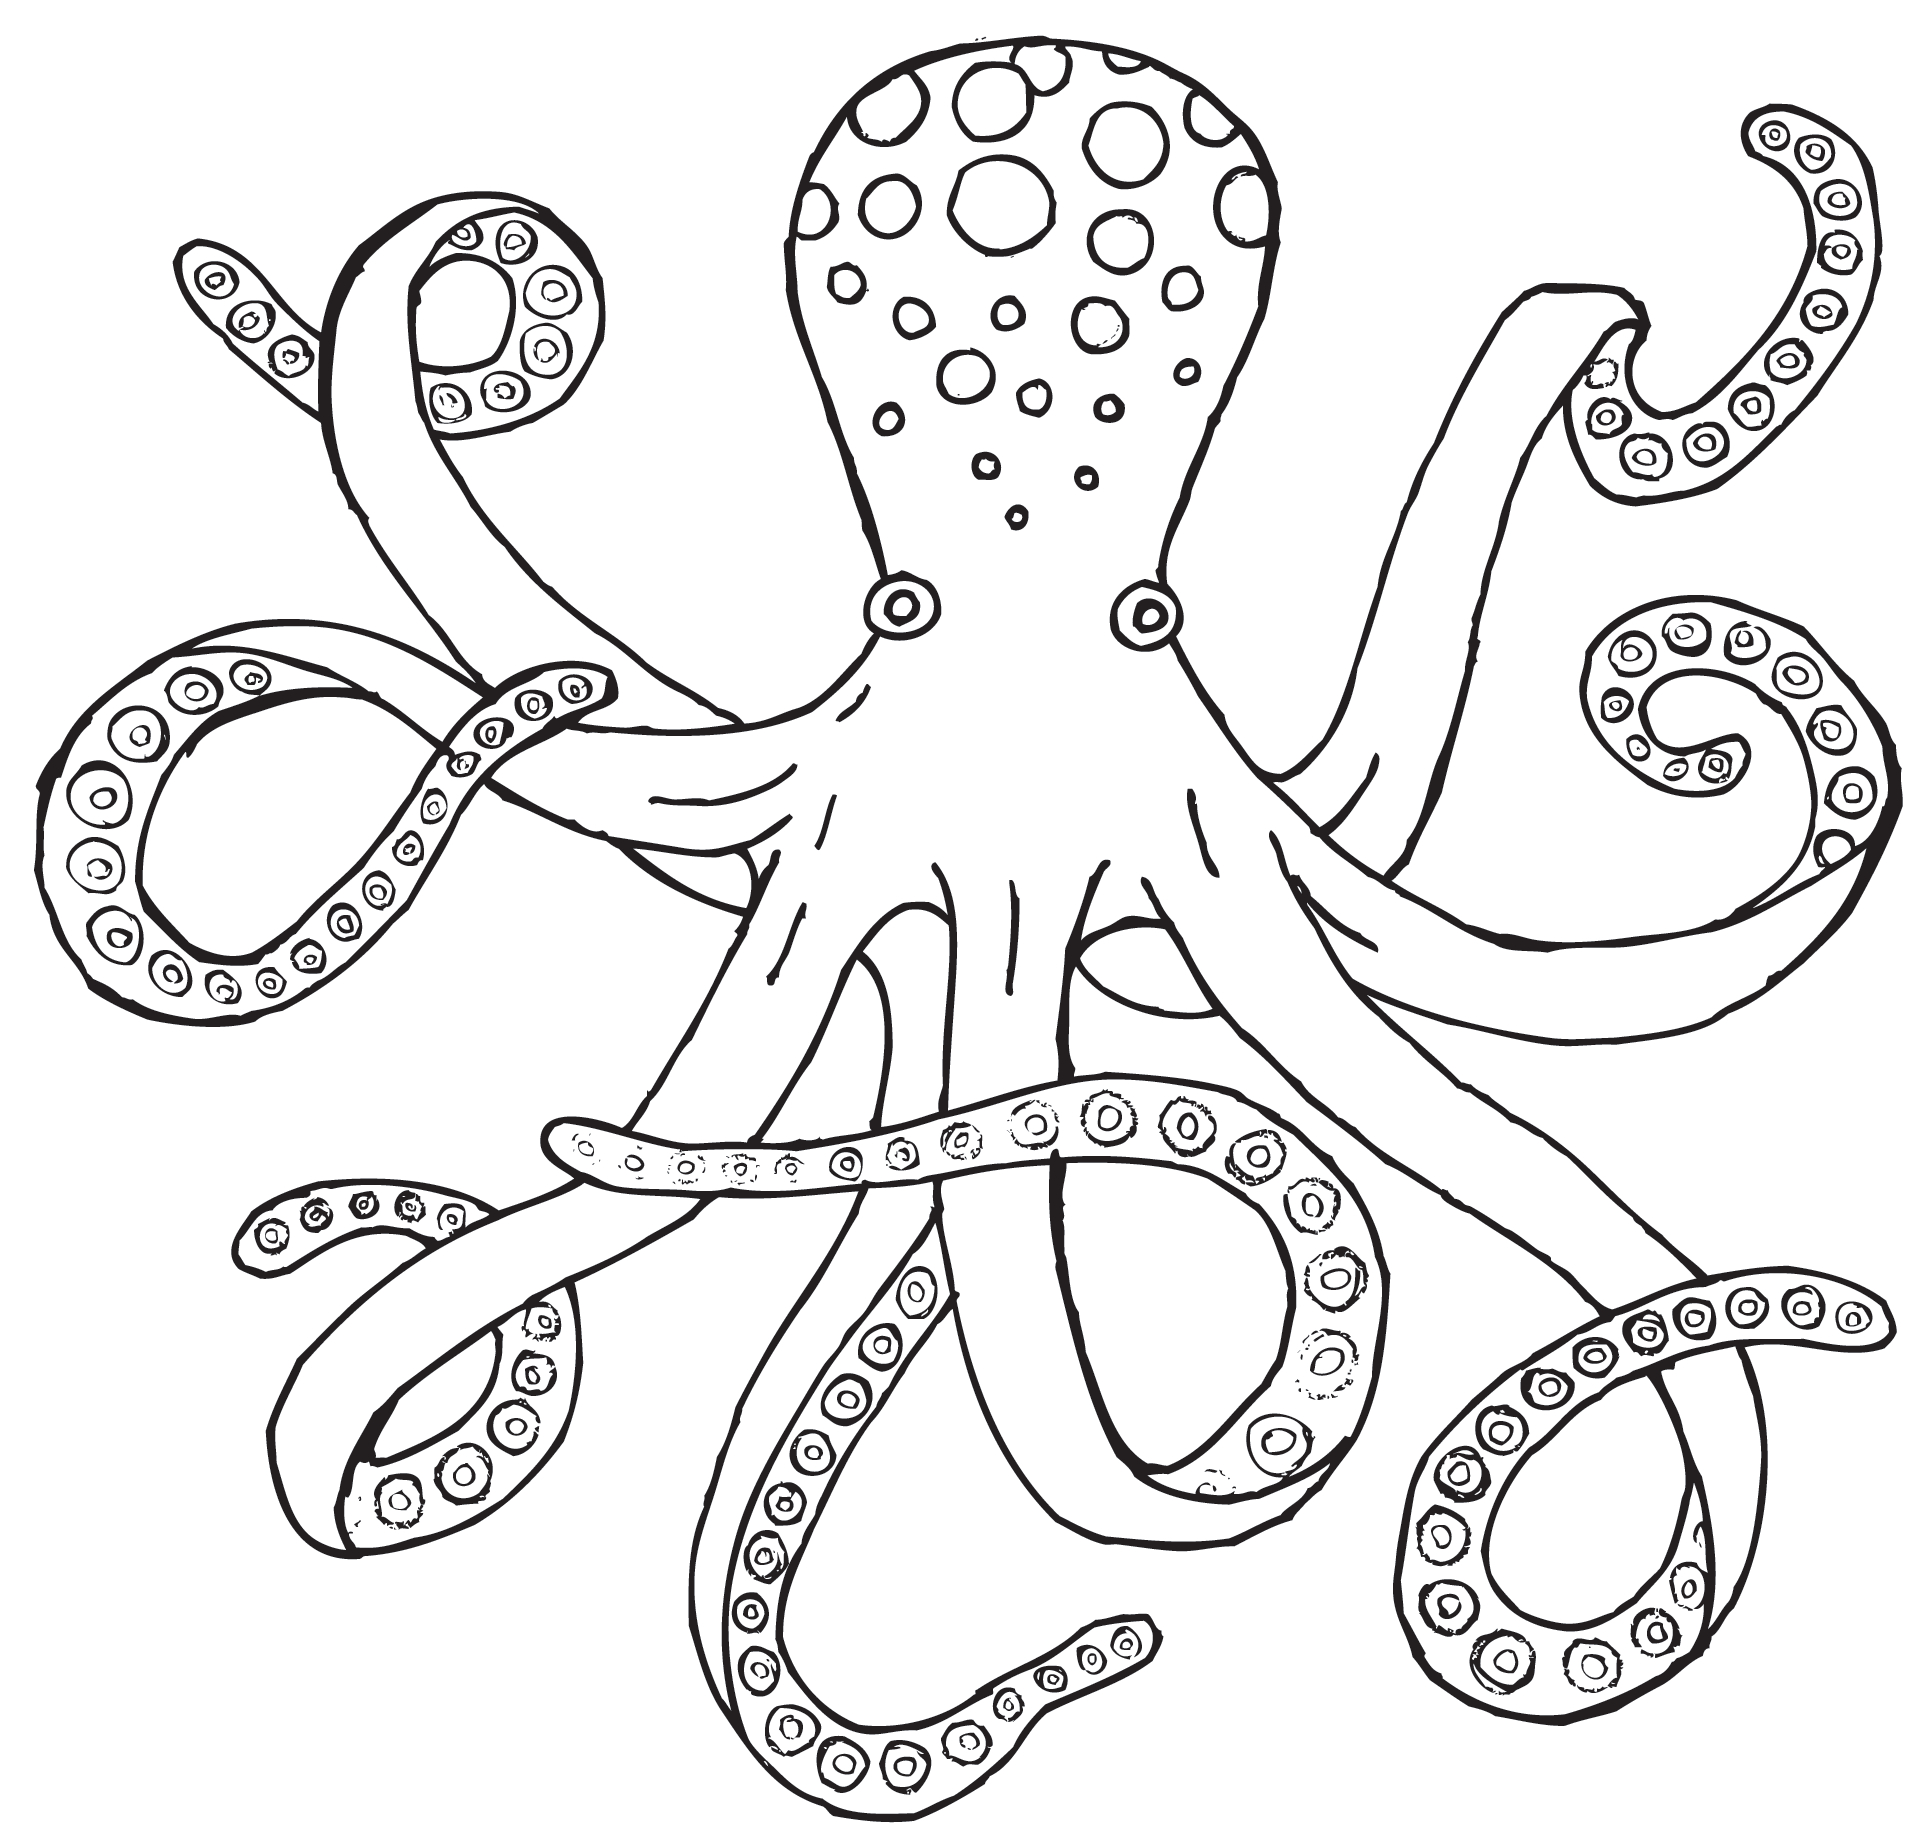 626 Simple Realistic Octopus Coloring Page with Animal character